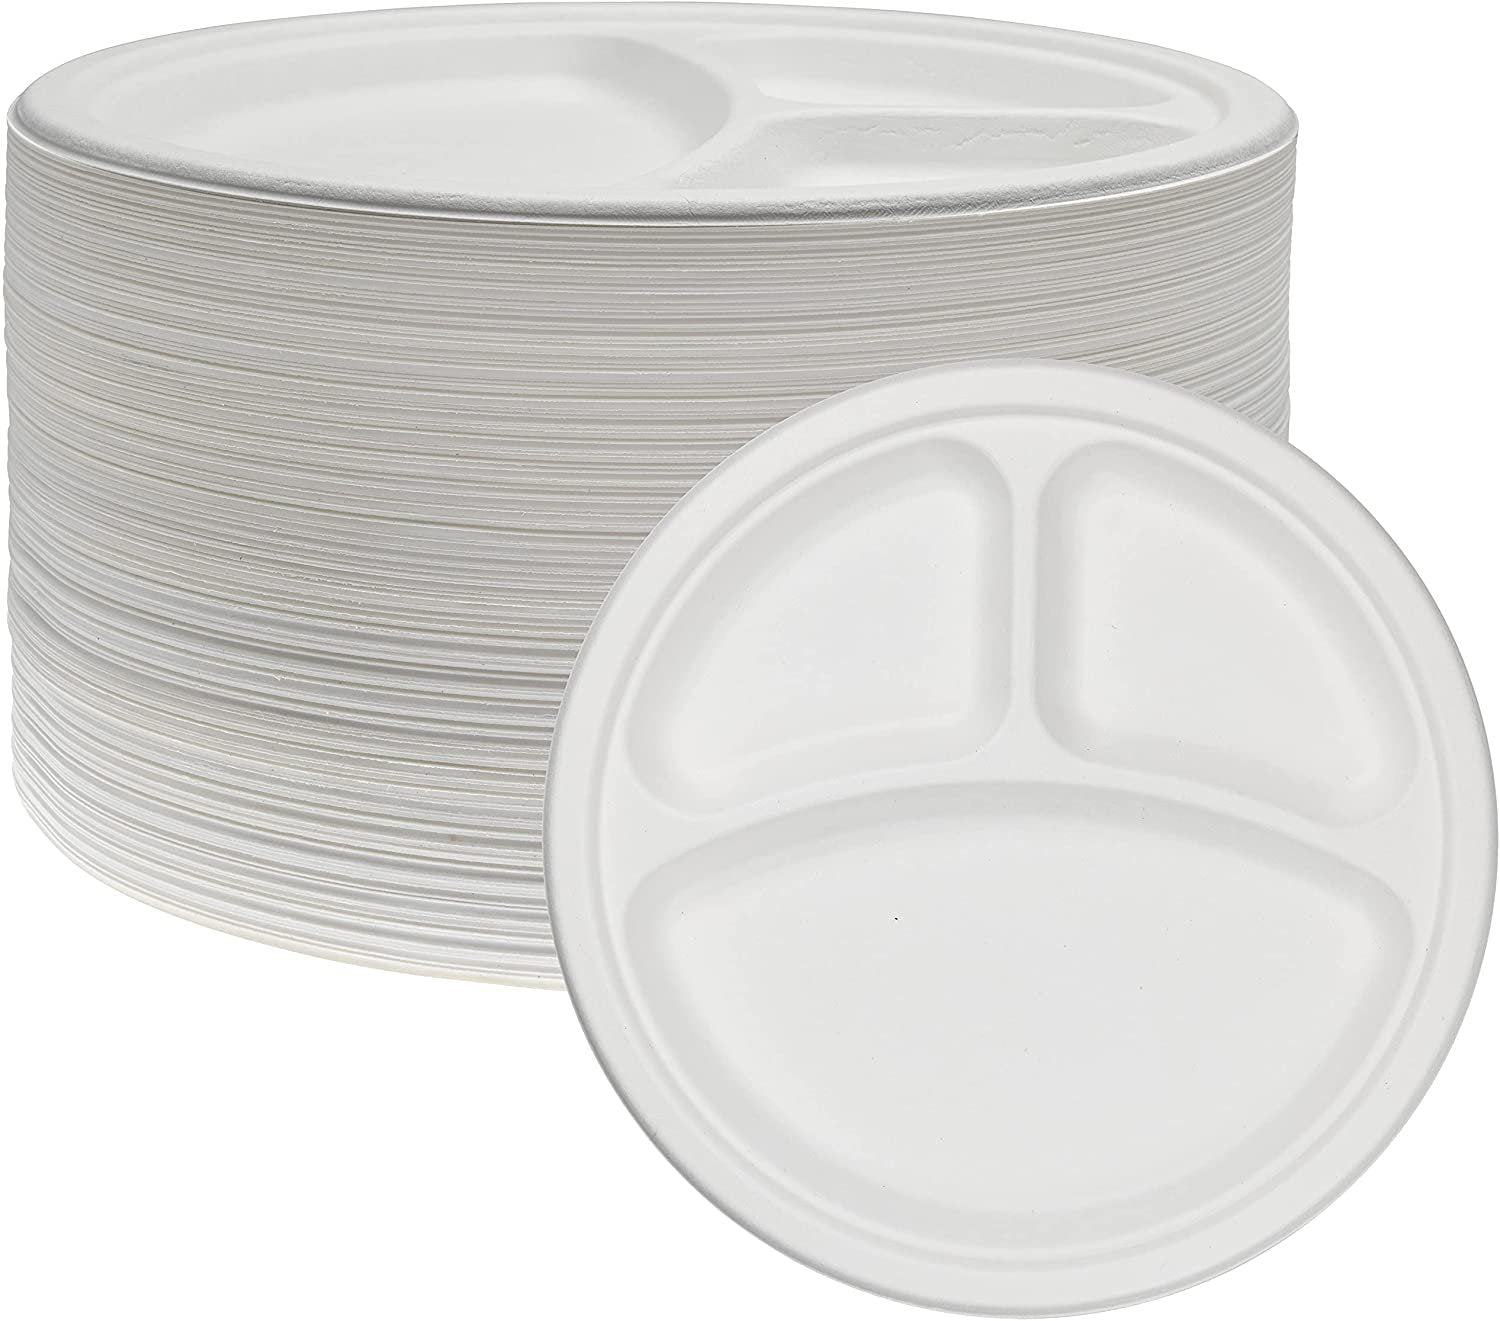 SUT 3 compartment plates disposable 100-Pack 9 Inch Heavy-Duty White Paper  Plates Made of Natural Sugarcane Fibers Biodegradable Plates 10inch-White